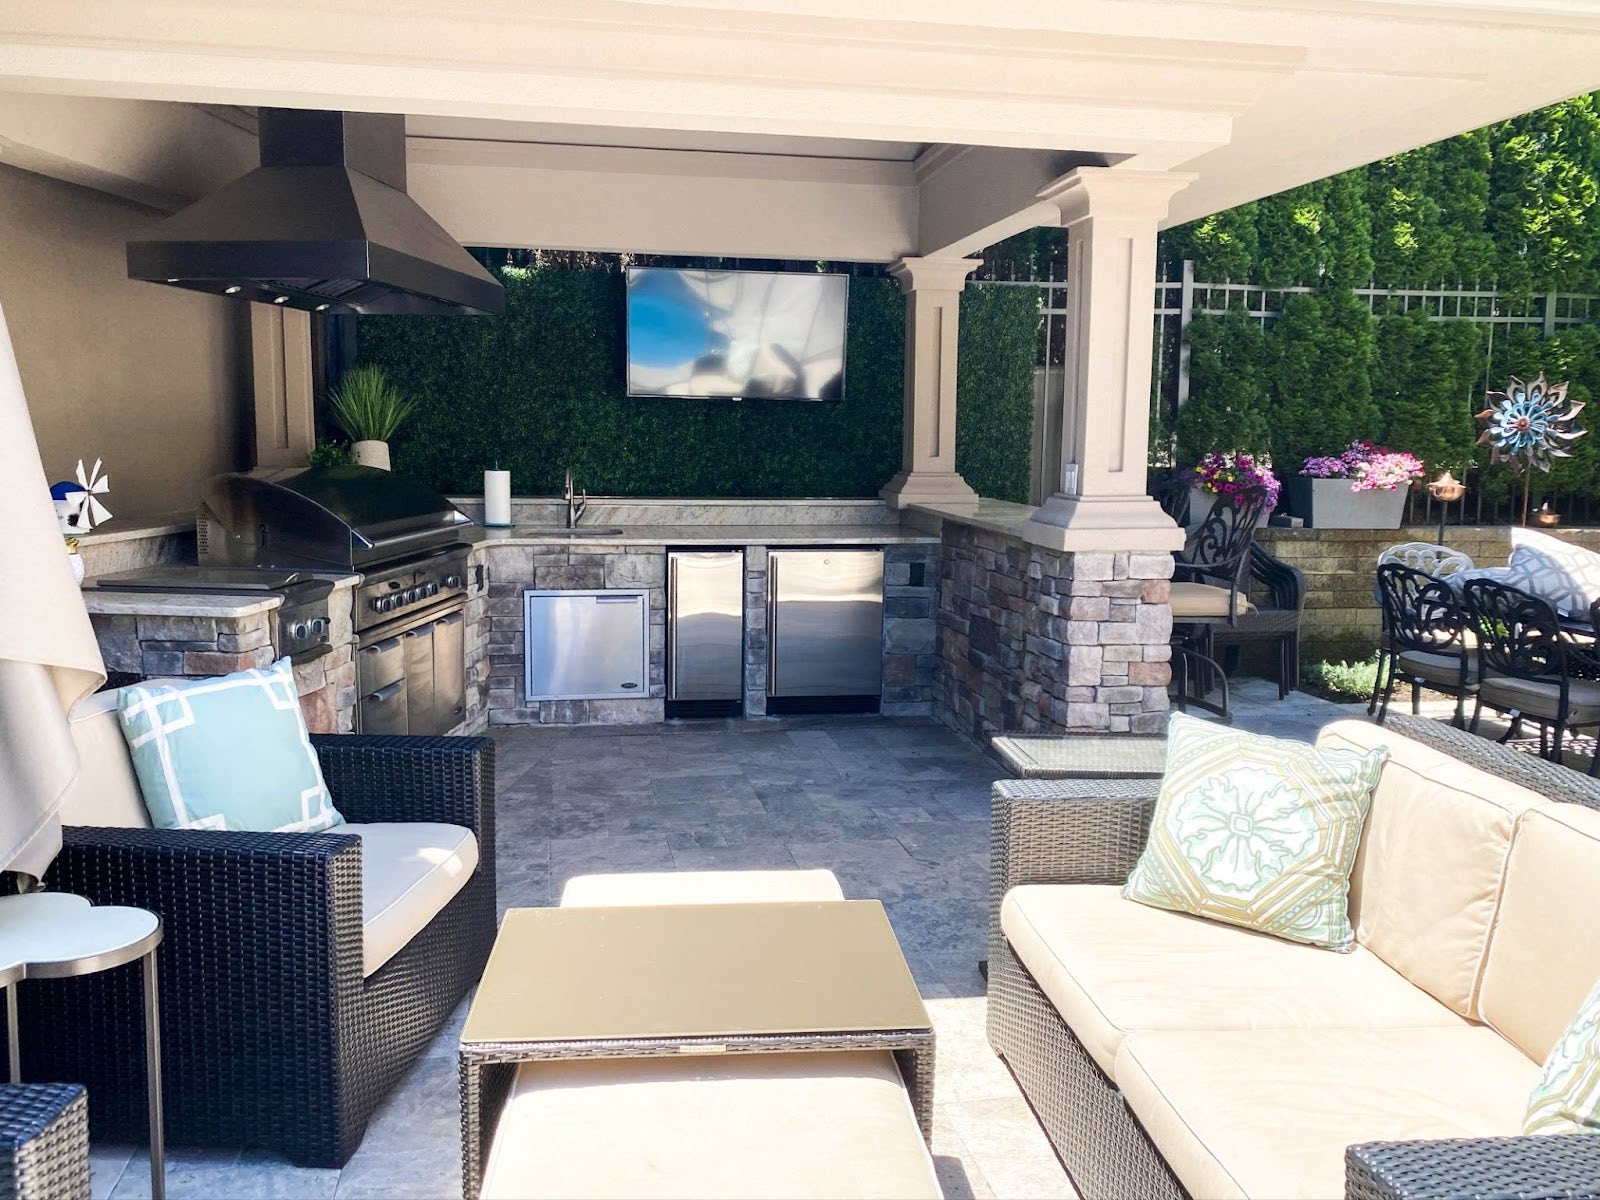 Inviting outdoor patio lounge area with comfortable seating and a fully equipped kitchen set against a green hedge. - Proline Range Hoods - prolinerangehoods.com 